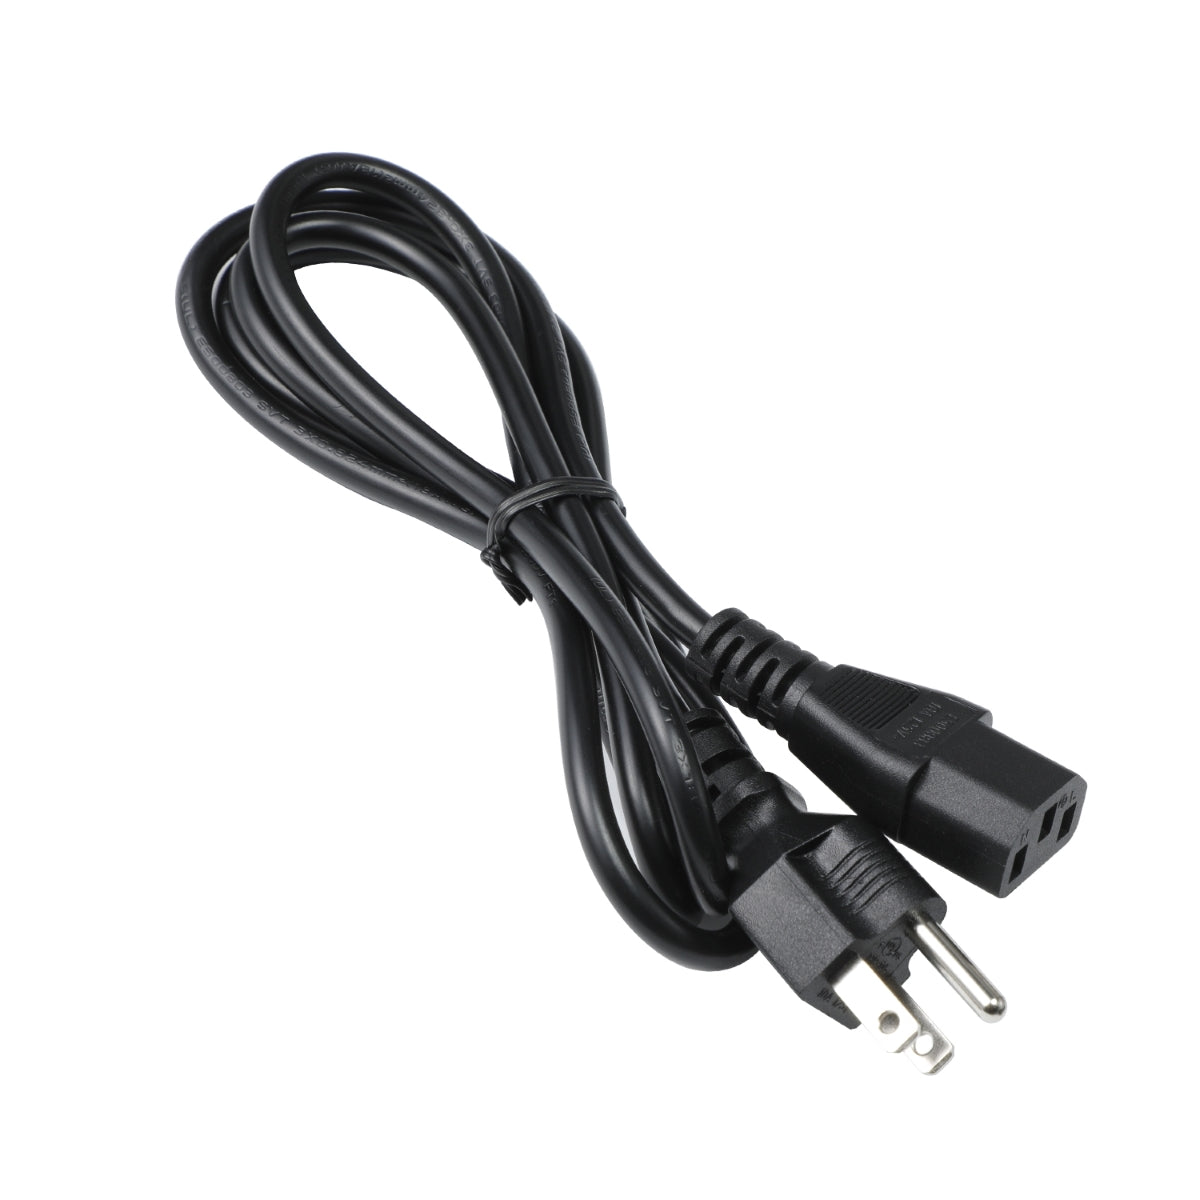 Power Cable for Philips 273V5LHSB/27 Monitor.